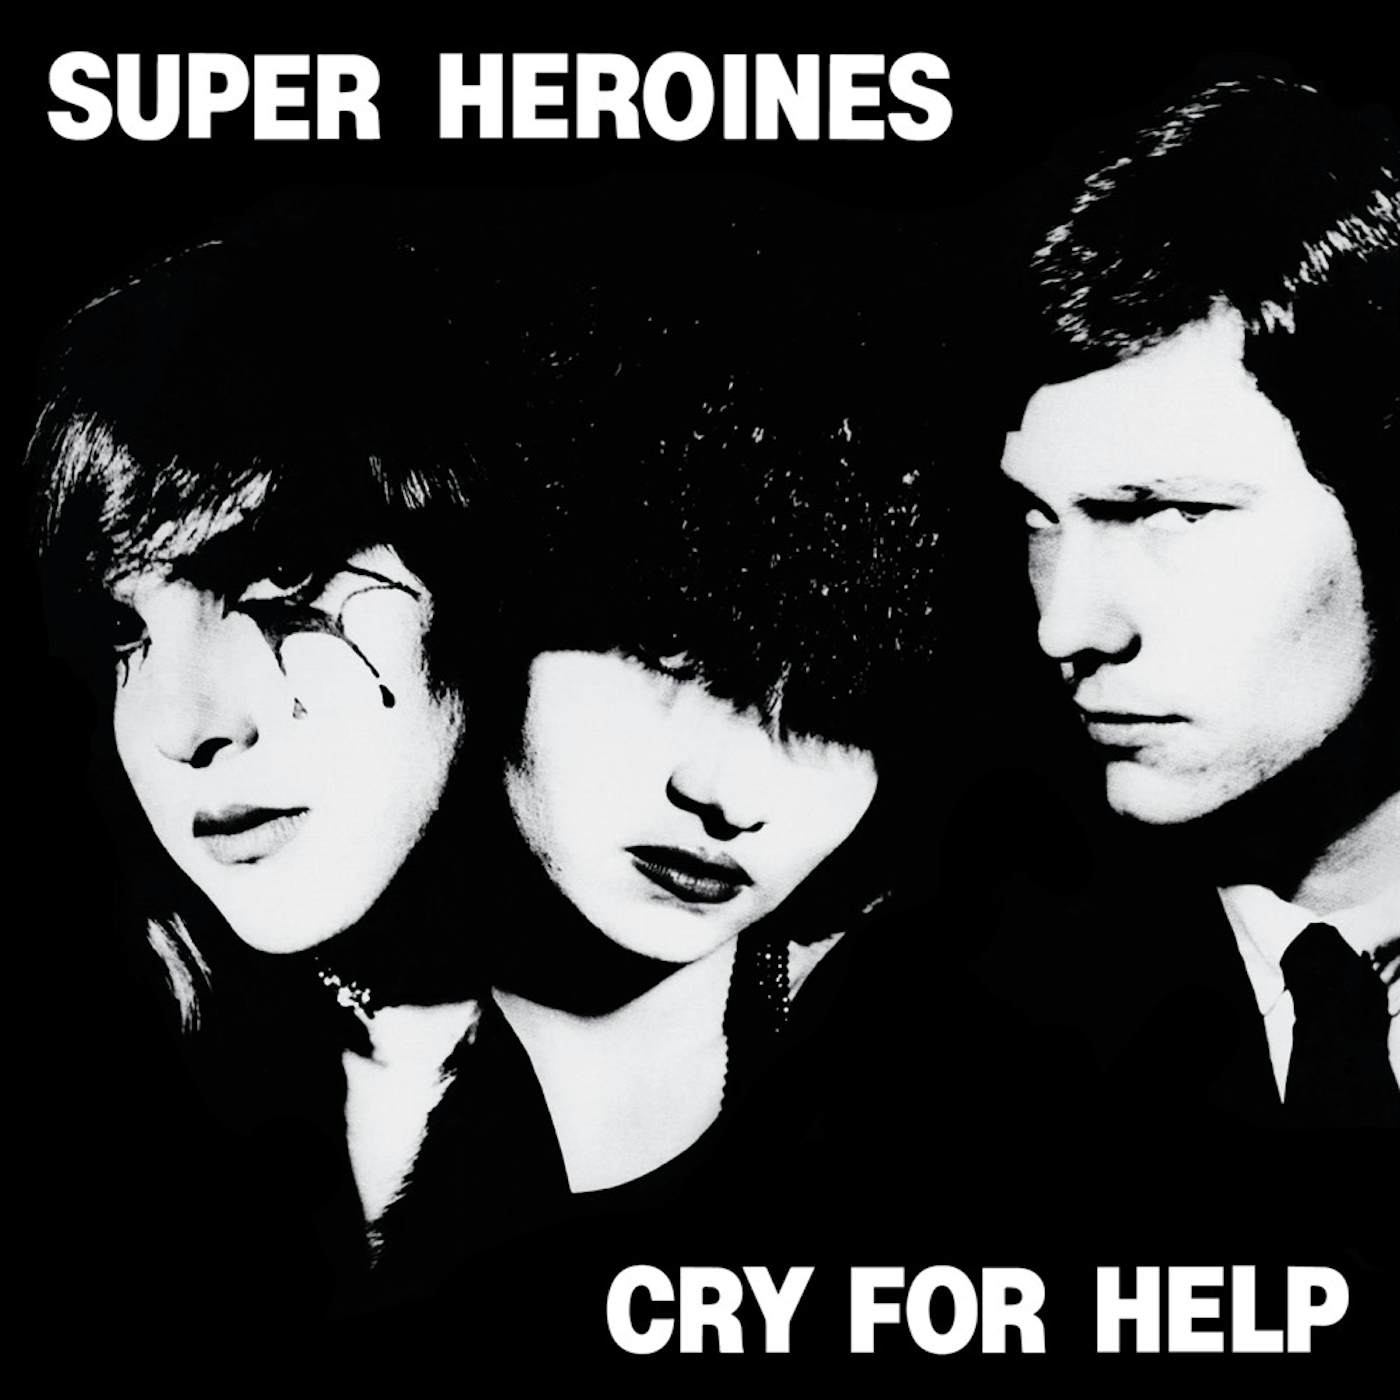 Super Heroines Cry For Help Vinyl Record